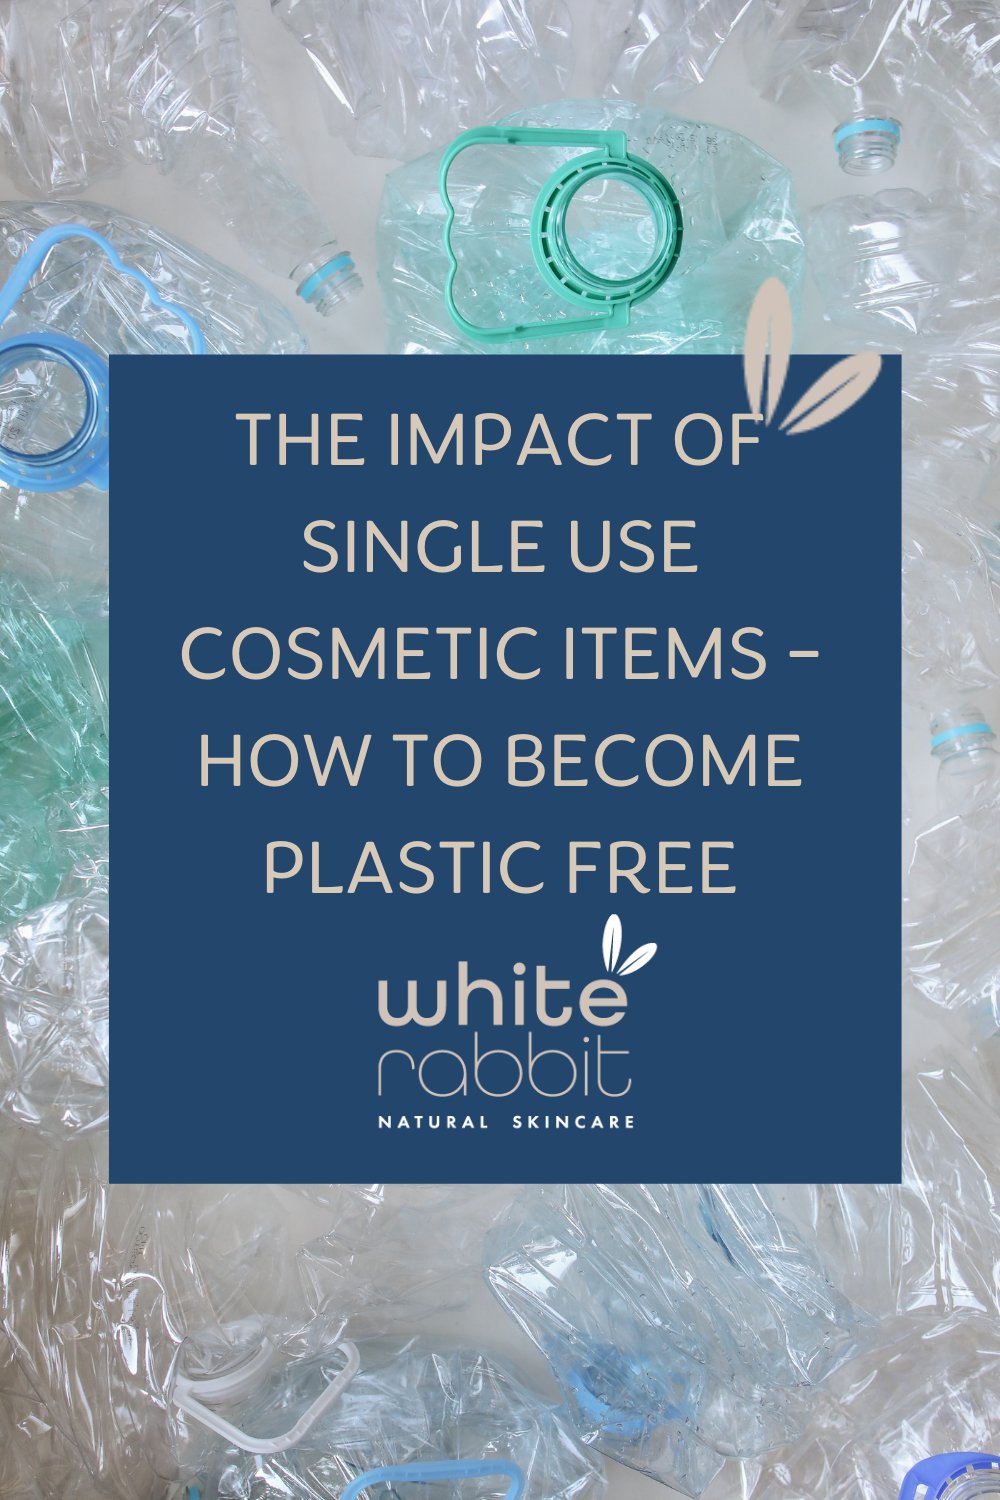 The Impact of Single use Cosmetic Items - How to become plastic free - White Rabbit Skin Care